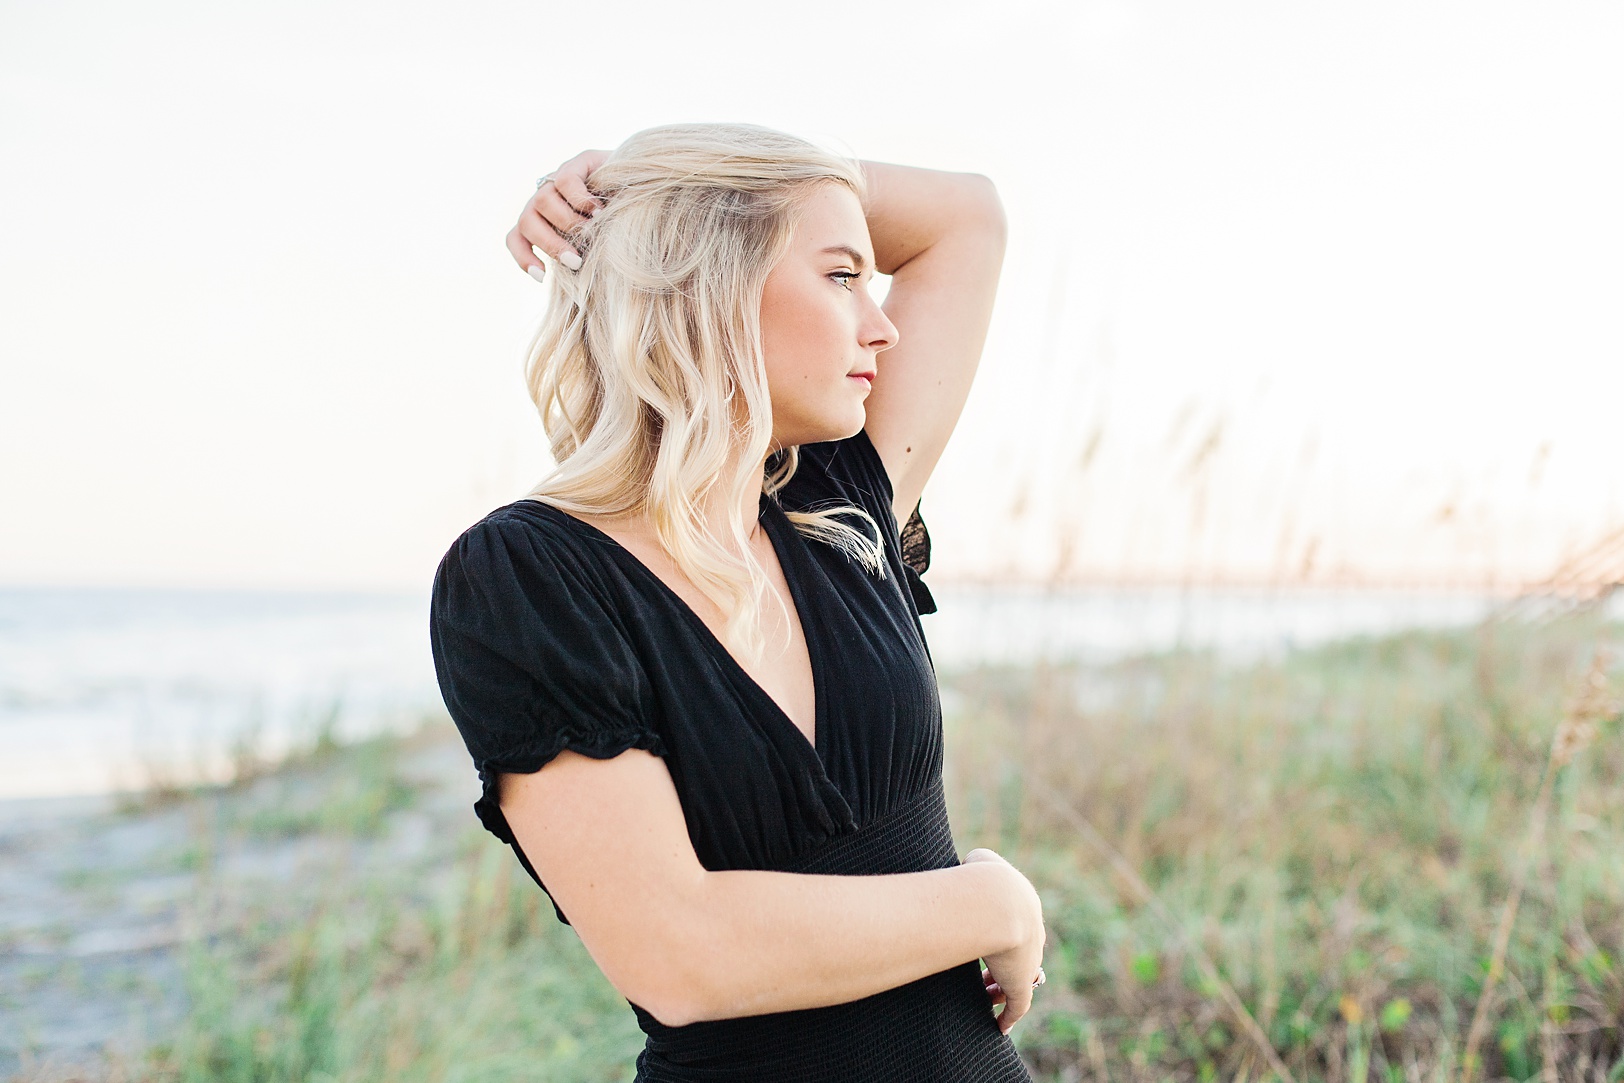 Sunset Senior Pictures at Folly Beach | Kaitlin Scott Photography